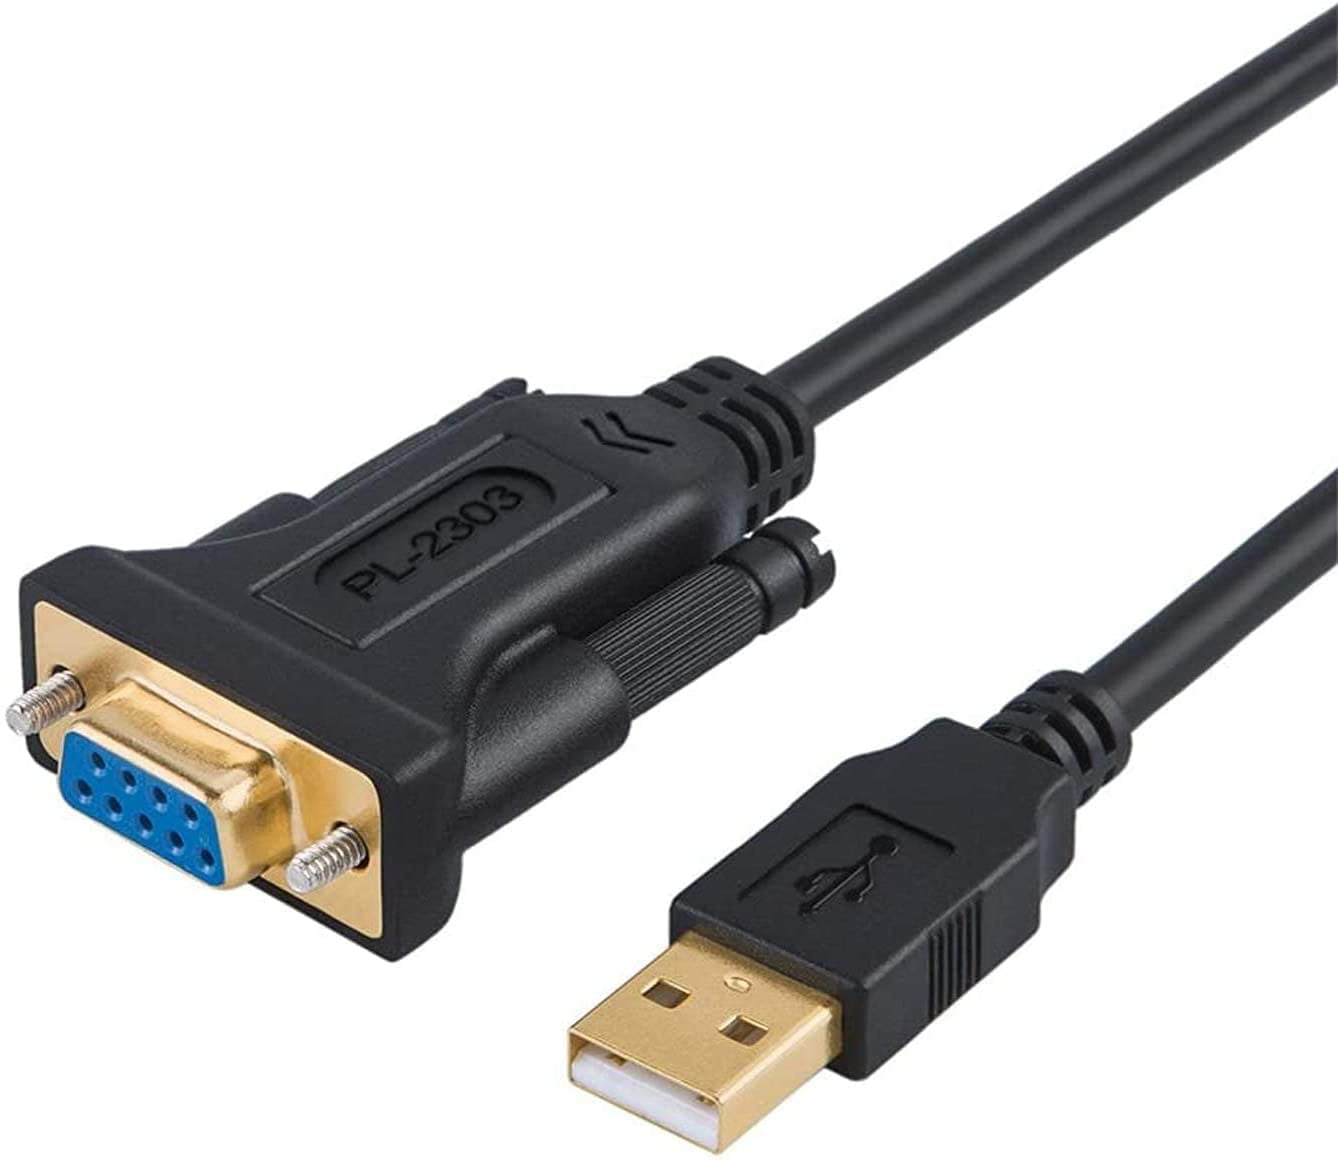 USB to Serial Adapter with PL2303 Chipset, 10 FT USB to Female Cable for Cashier - Walmart.com